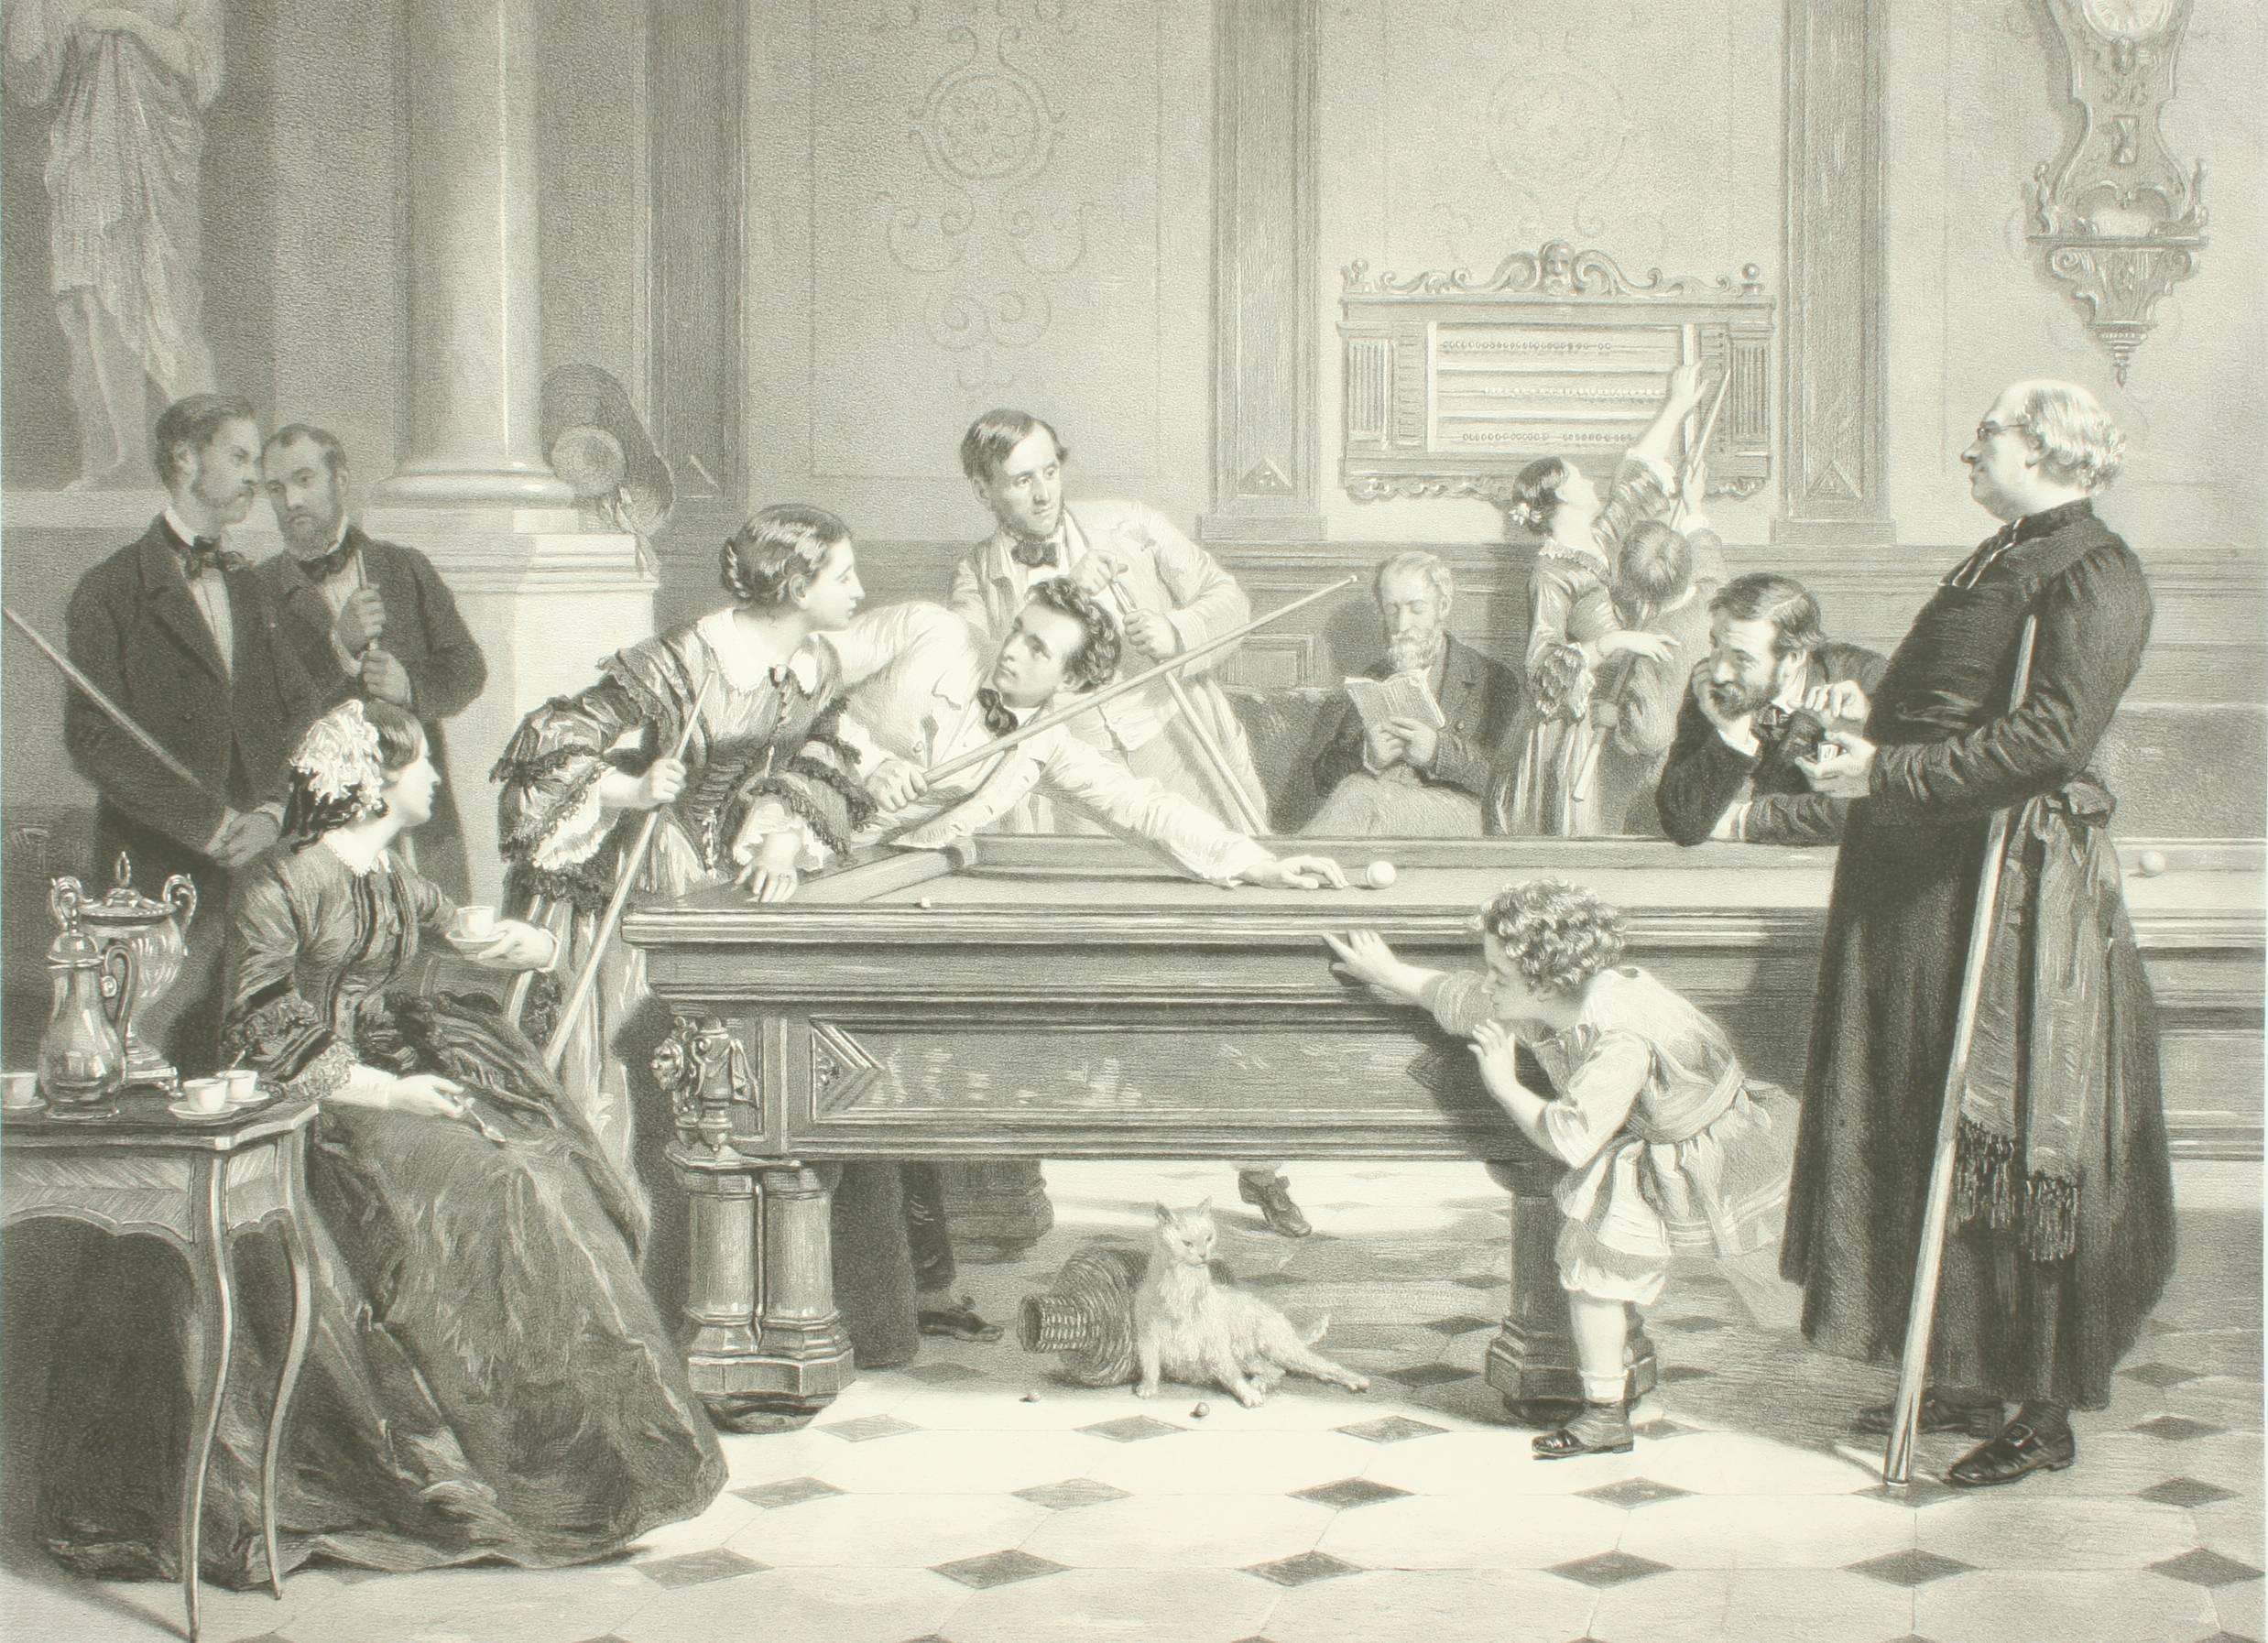 Billiard room print after Hildemaker.
A very charming billiard lithograph by Claude Thielley (French, 1811-1891) after the original painting by Eugene Ernest Hillemacker 1818-1887.
The picture depicts a billiard room full of men, women and